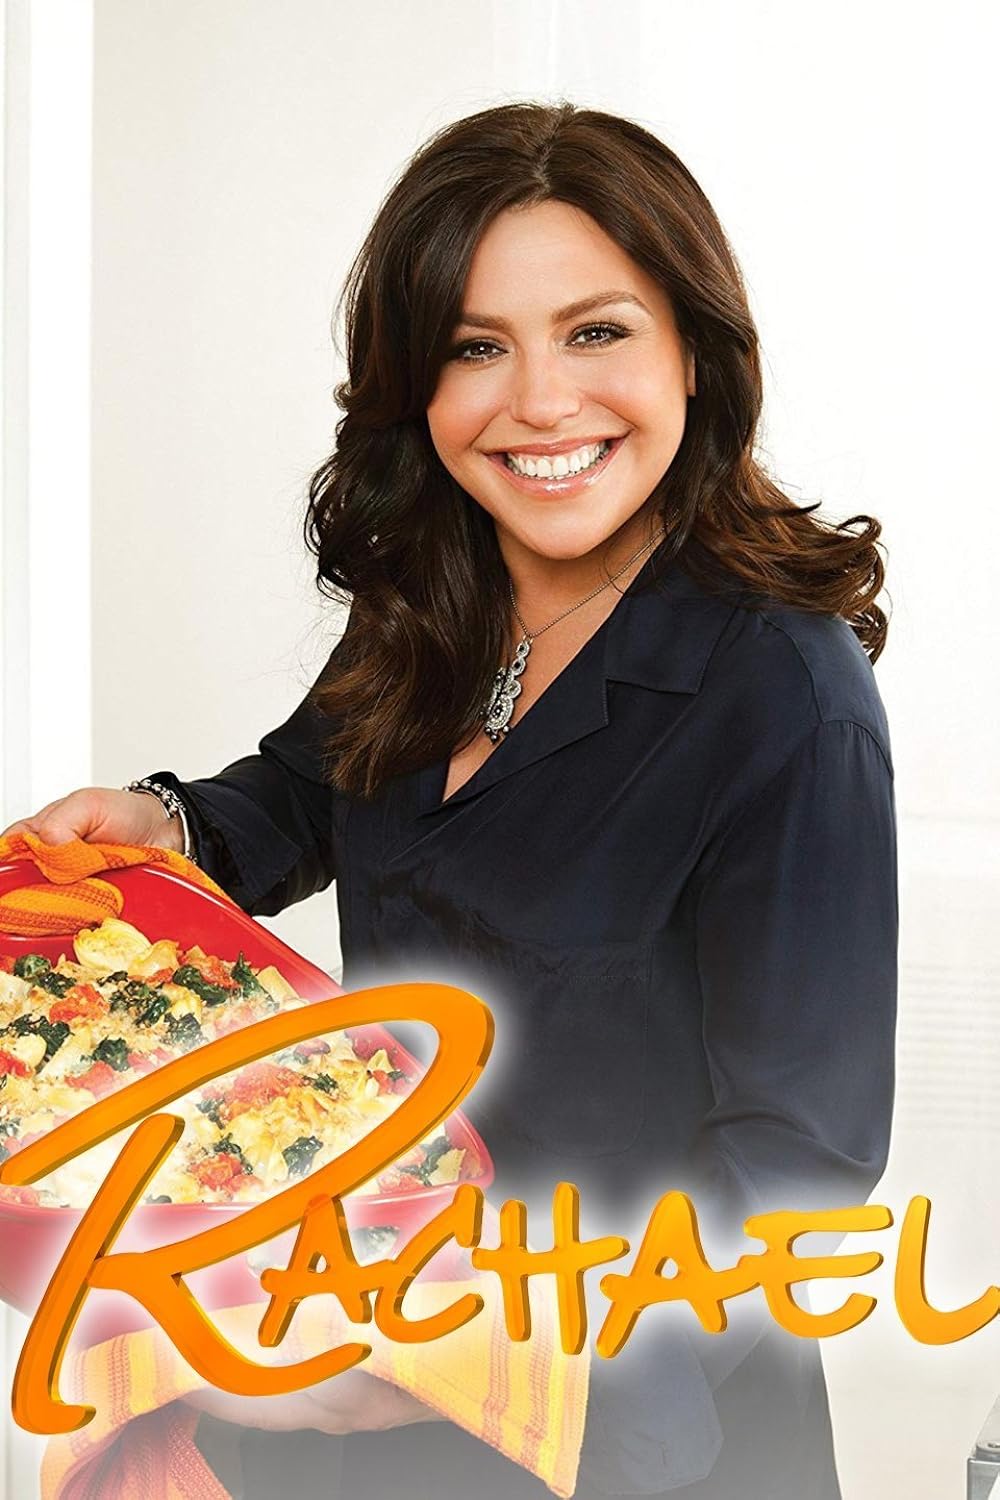 Rachael Ray The Hilarious Loni Love Is Hanging with Rachael Today! And, Rachael's in the Kitchen with Irish Cooking Sensation Donal Skehan!